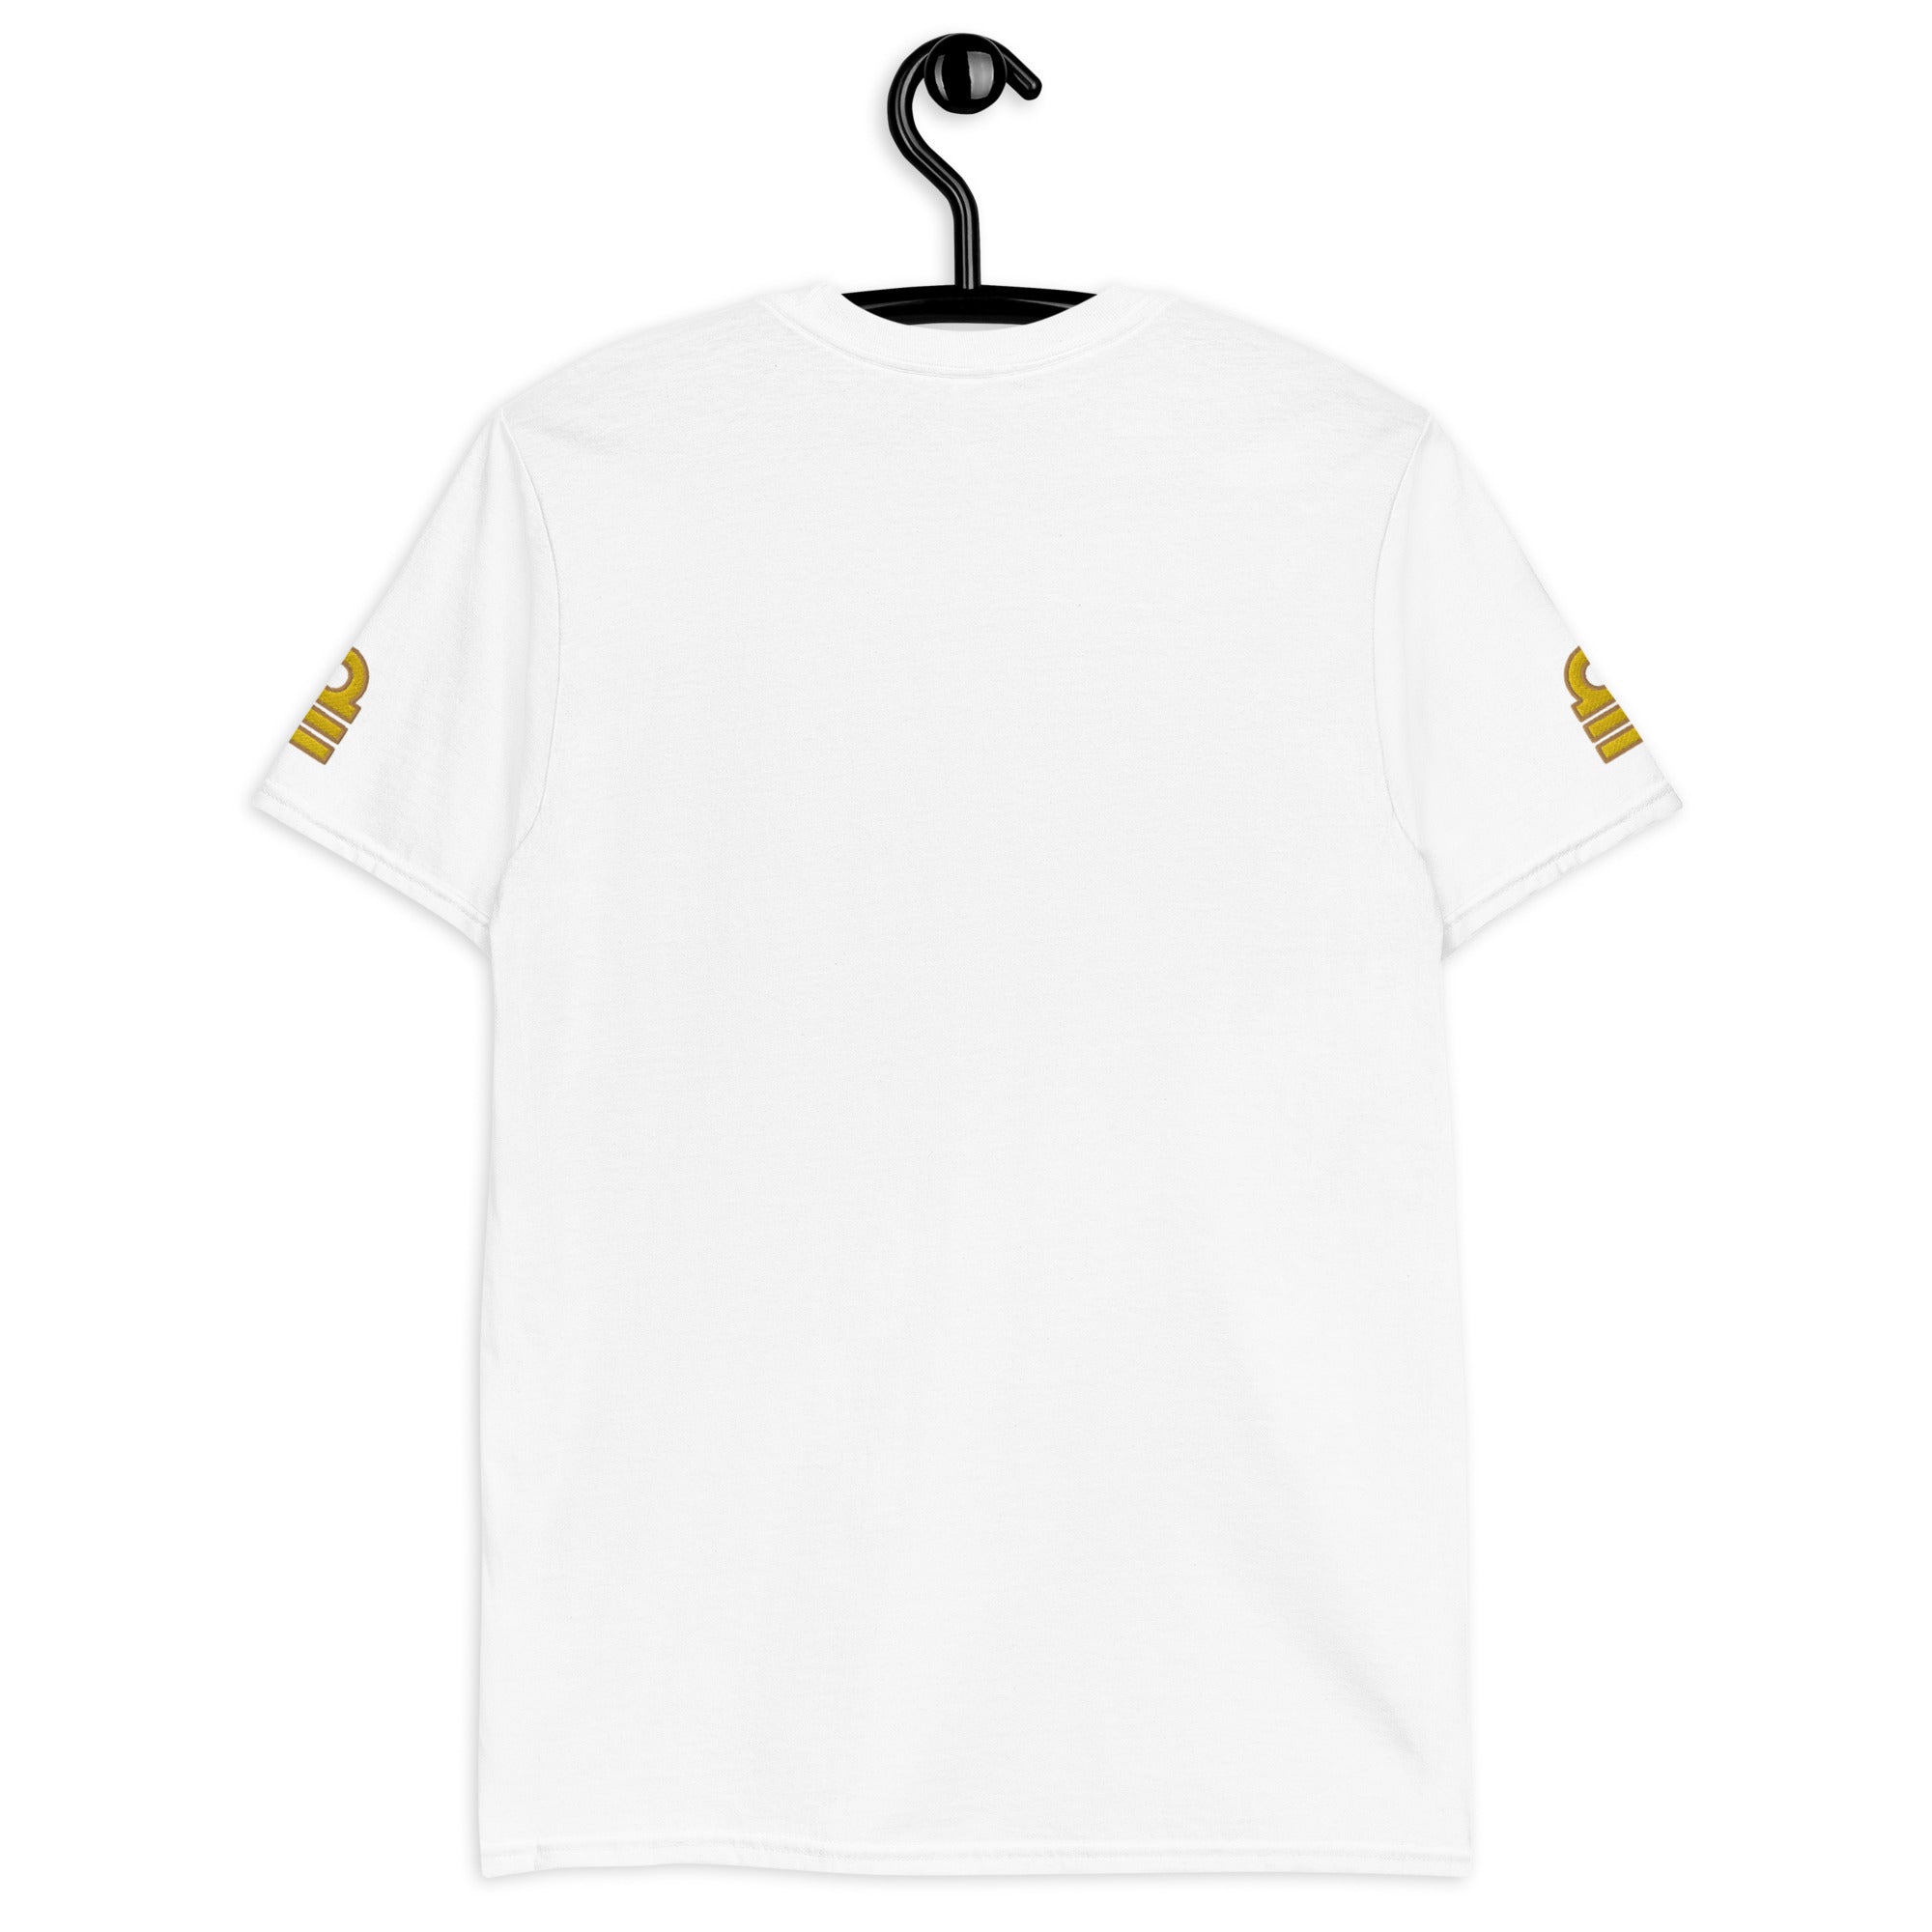 Chief Officer t-shirt with embroidery (Round epaulettes)